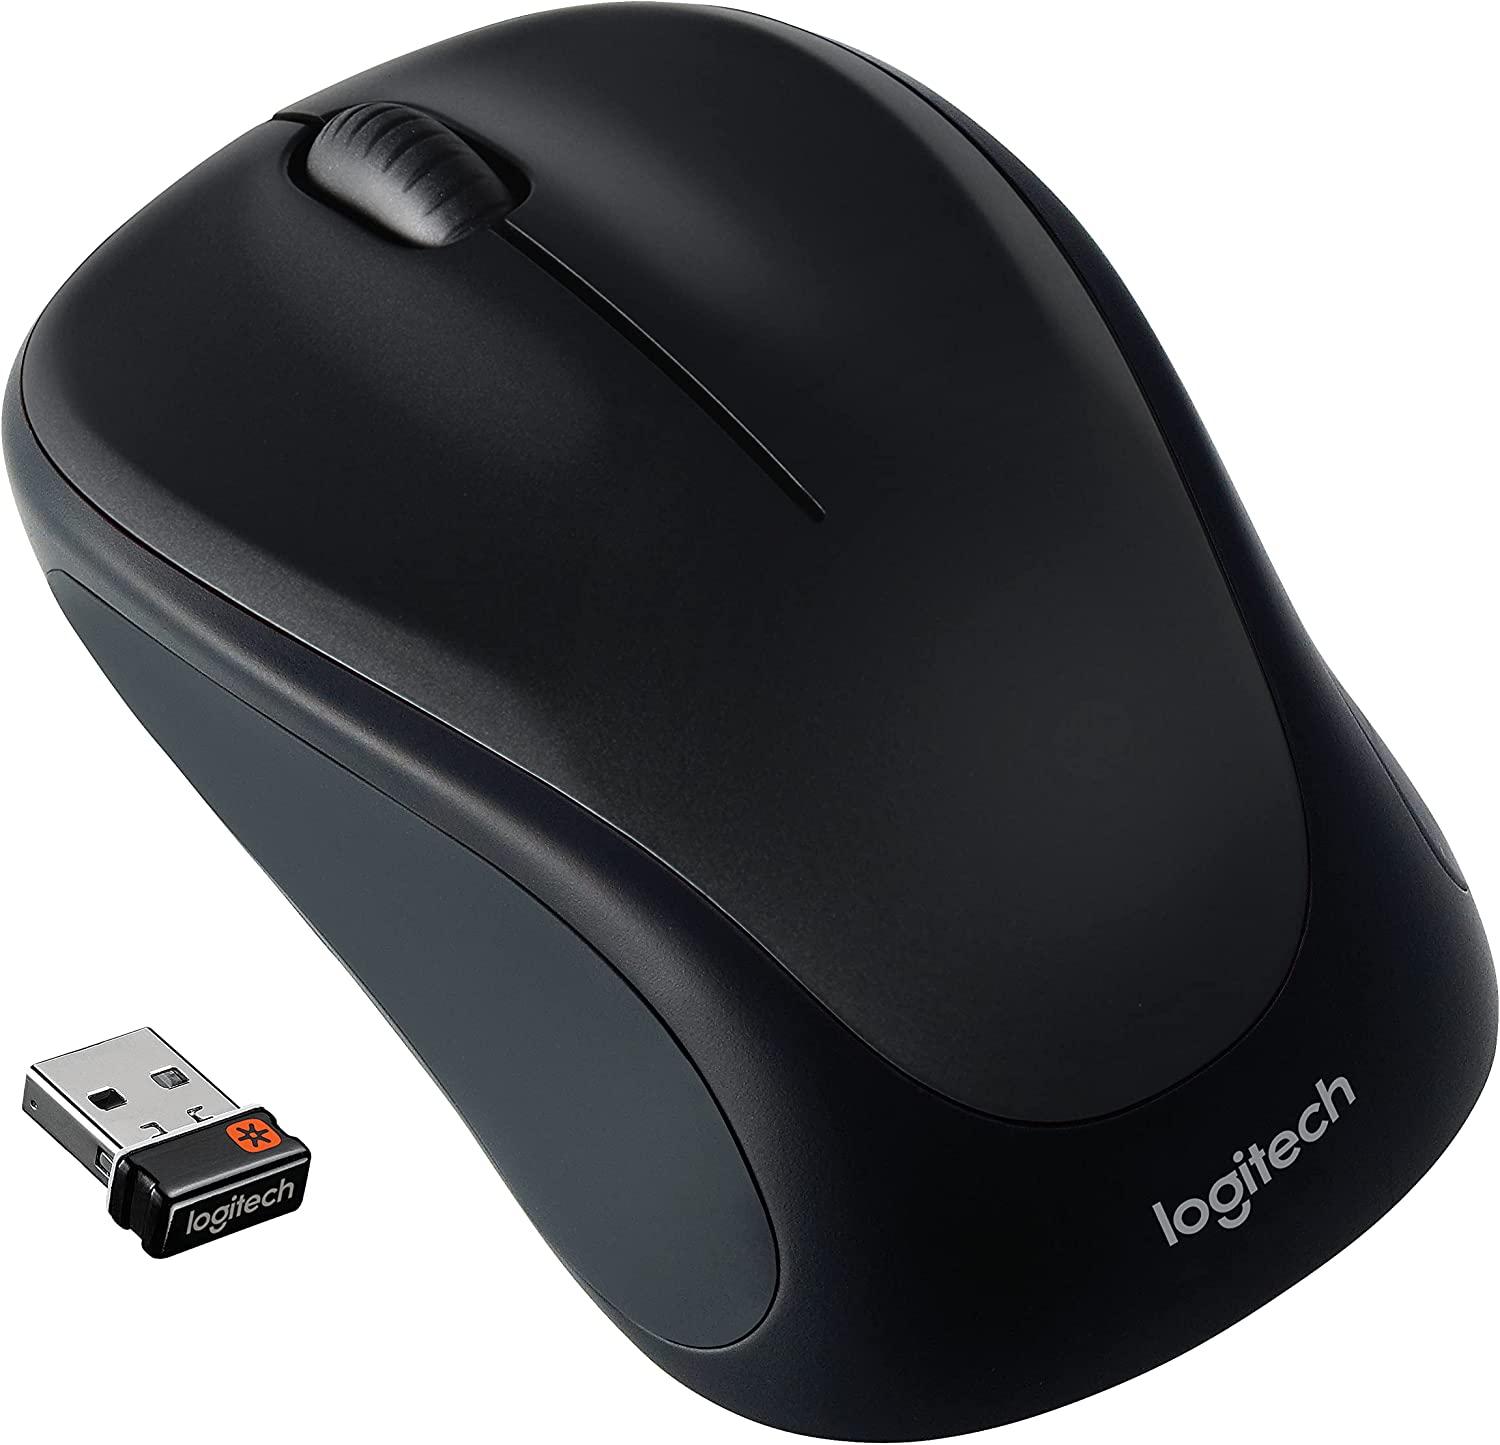 Logitech M317 Wireless Mouse with USB Receiver for $9.99